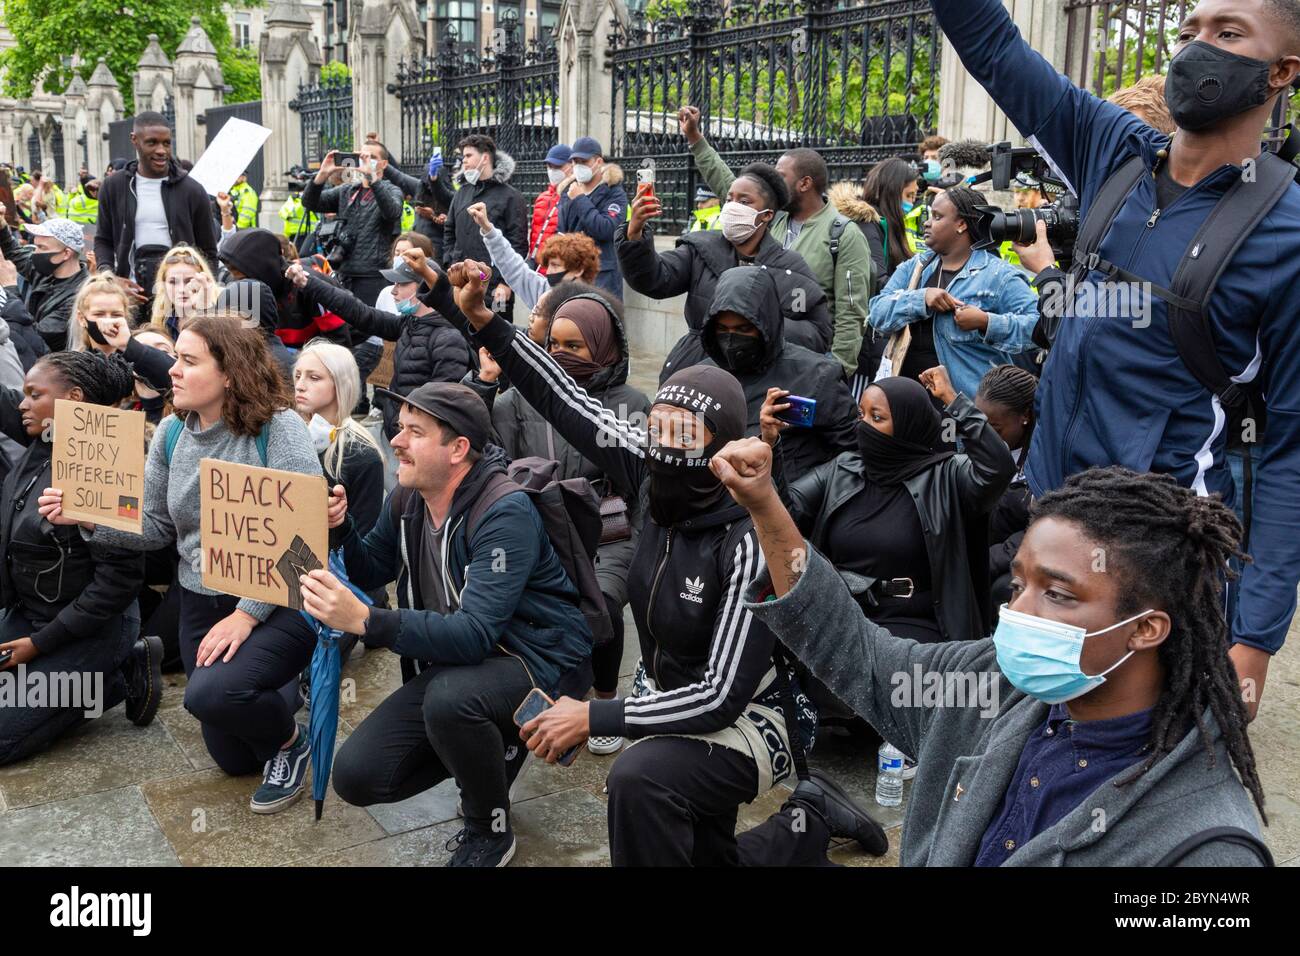 Protesters take the knee during a Black Lives Matters protest, Parliament Square, London, 7 June 2020 Stock Photo